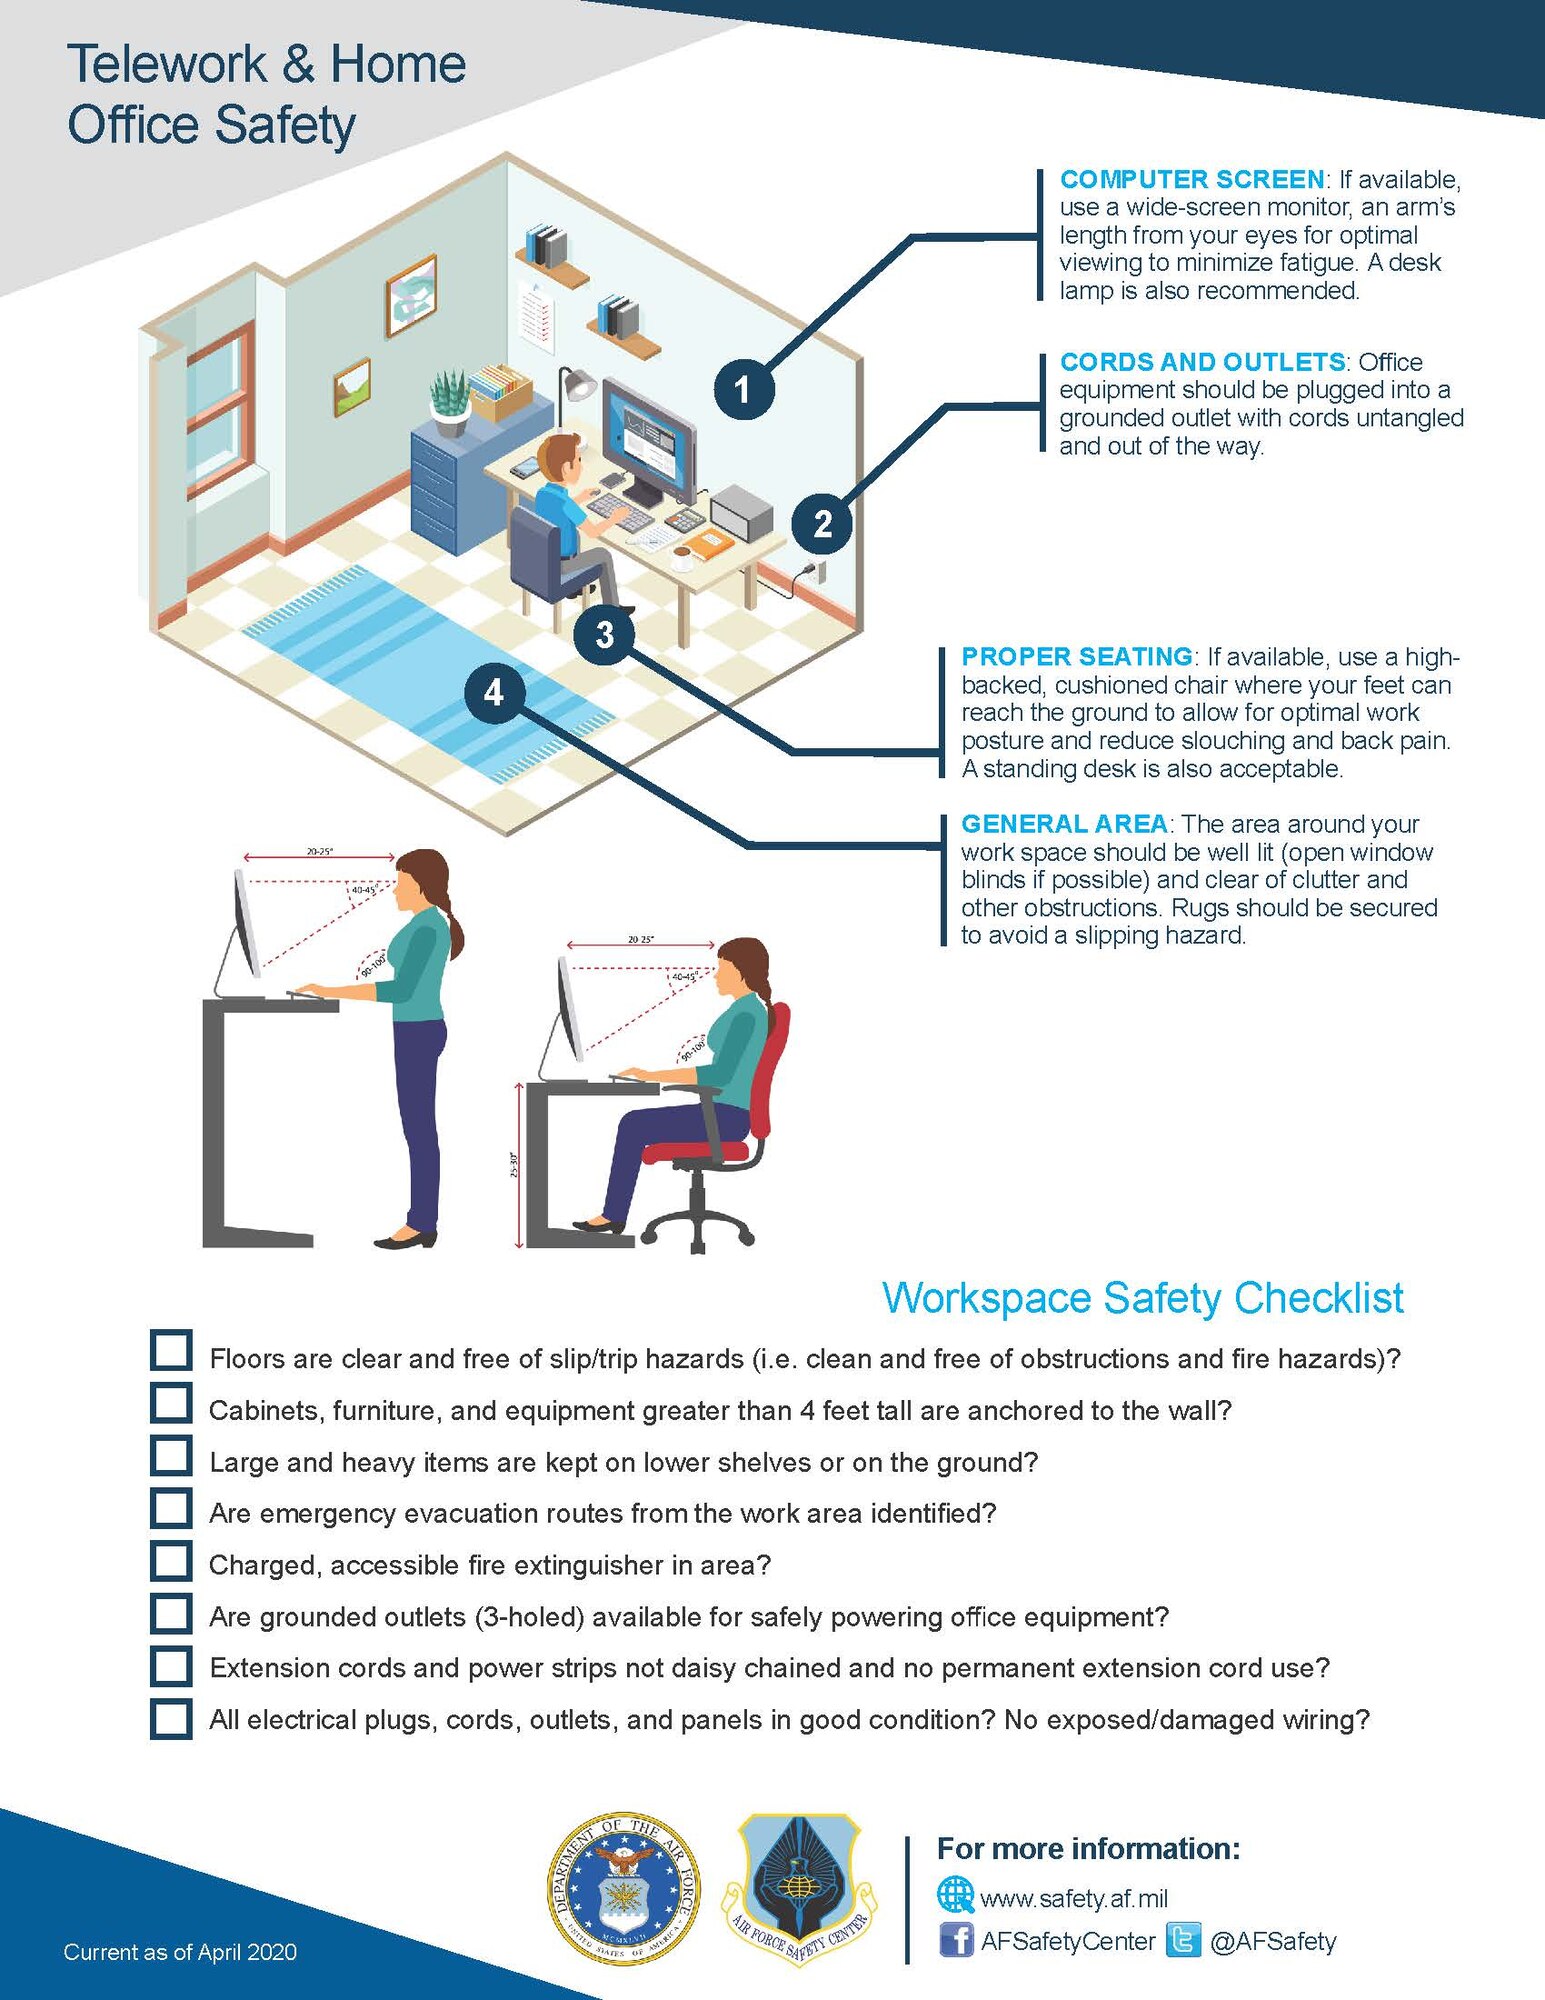 Home Office Safety infographic